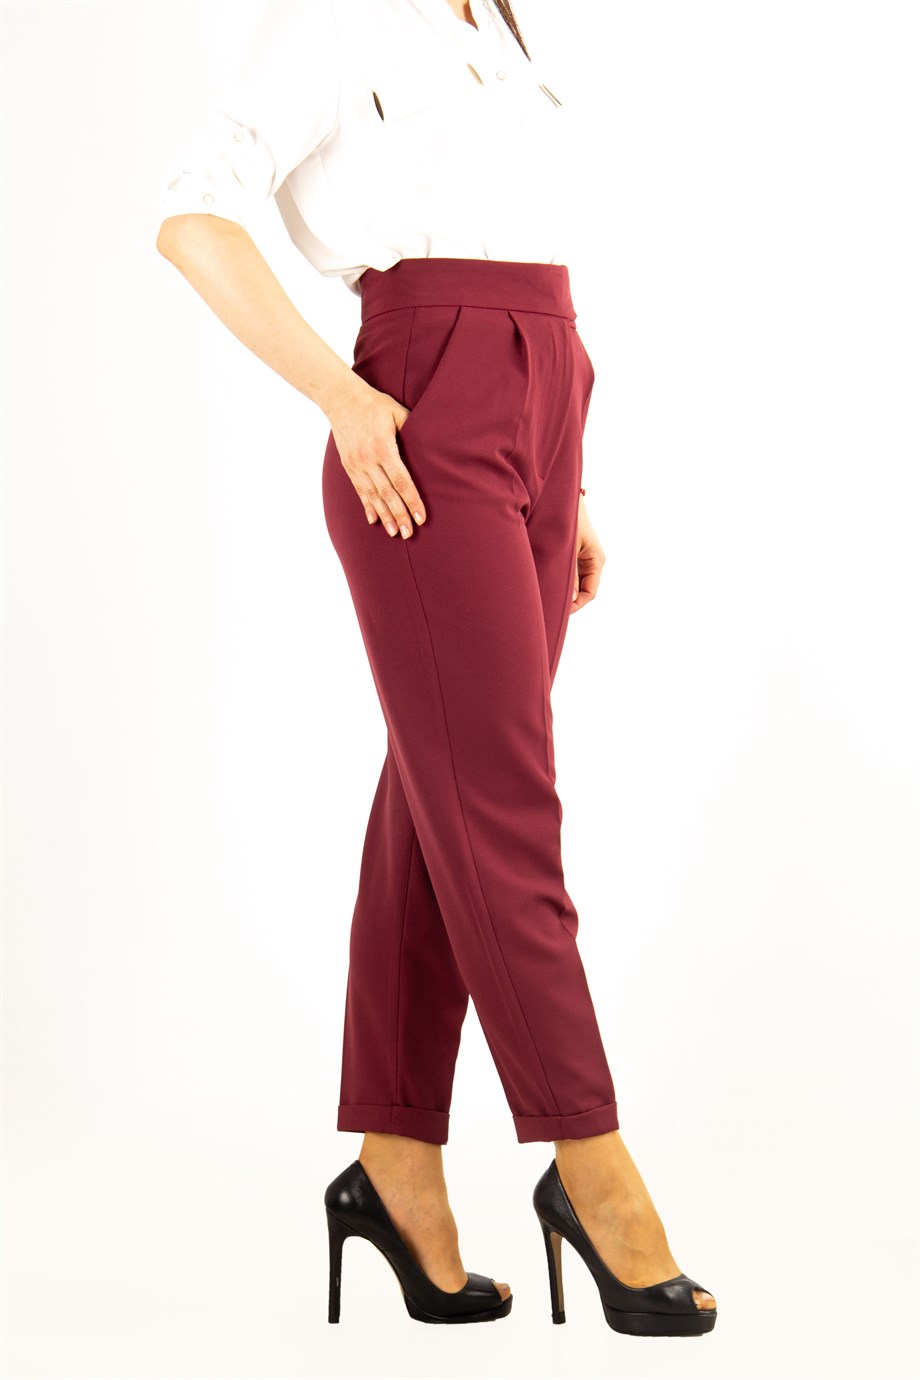 Ladies Claret Double Layer Trousers with zip and button fastening